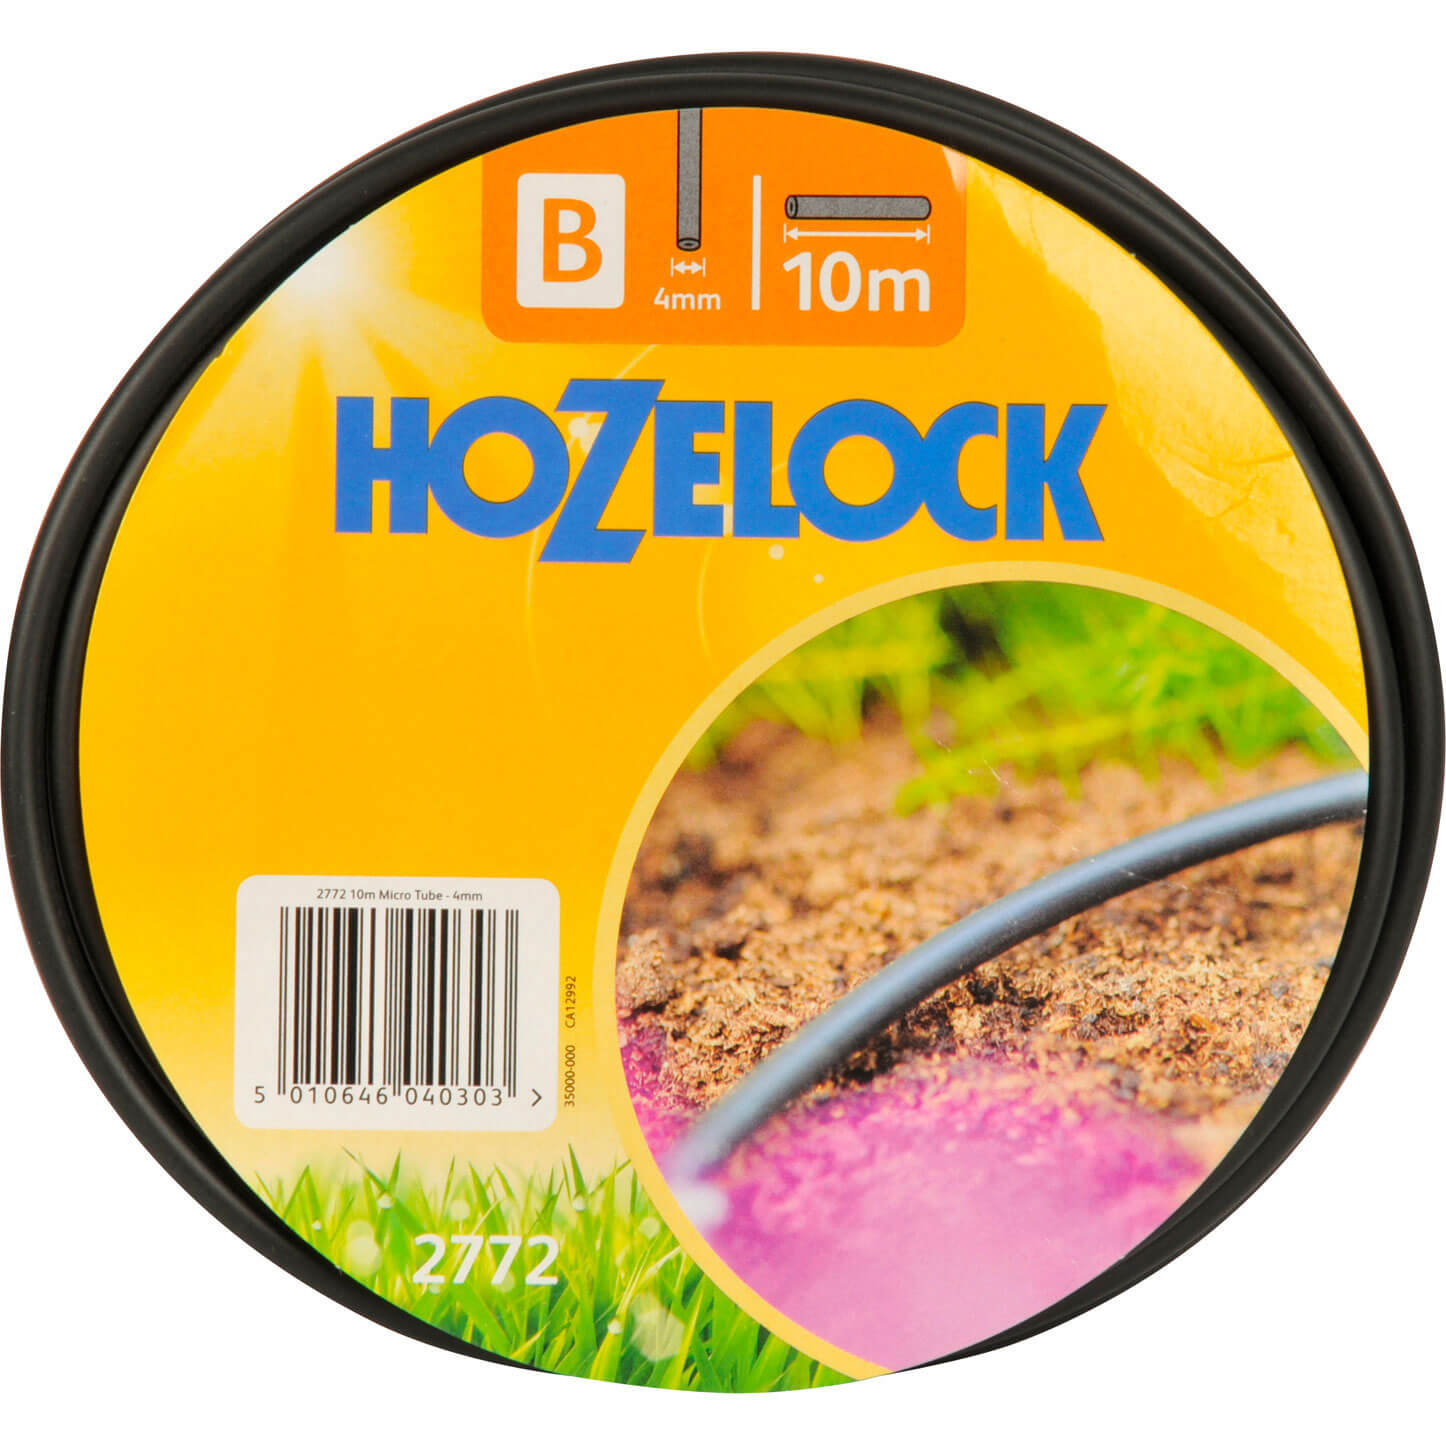 Hozelock 10 Metre Supply Hose for 4mm Auto Watering System